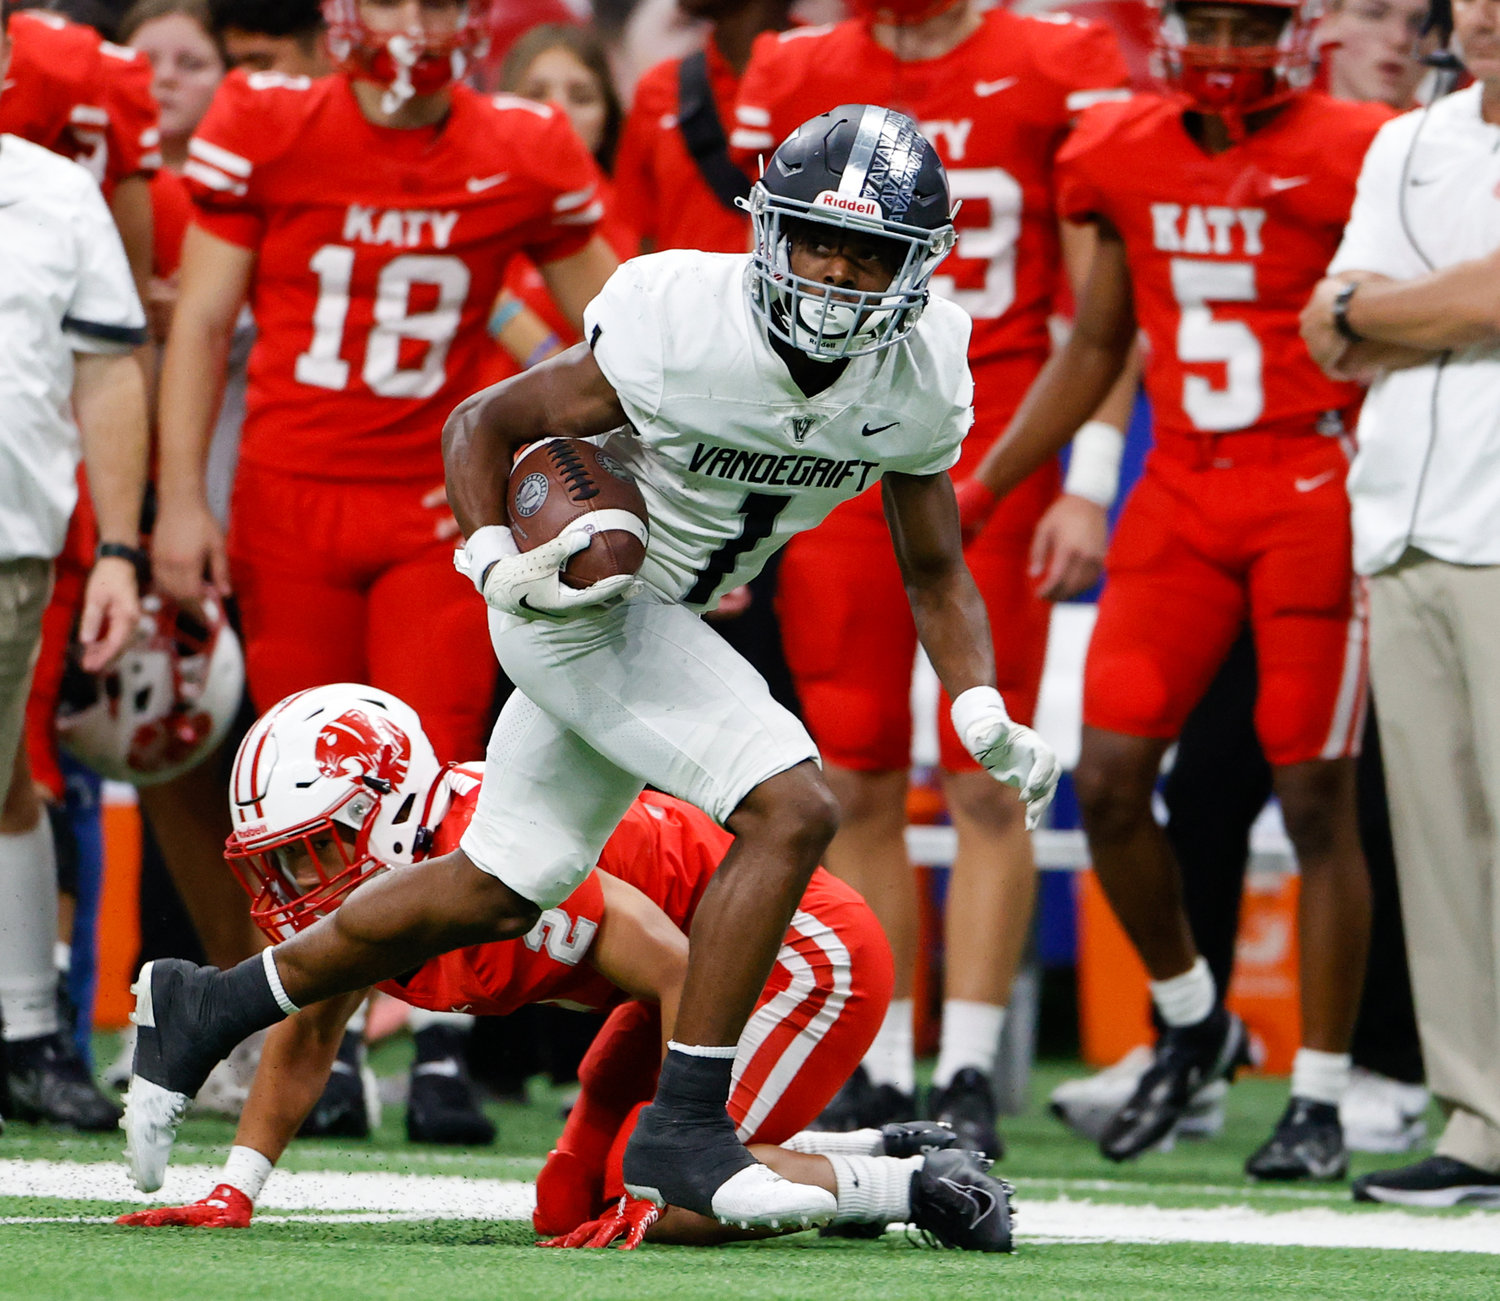 Vandegrift Vipers junior wide receiver Miles Coleman (1) carries the ball after a catch during the Class 6A-DII state semifinal football game between Katy and Vandegrift on Dec. 10, 2022 in San Antonio.